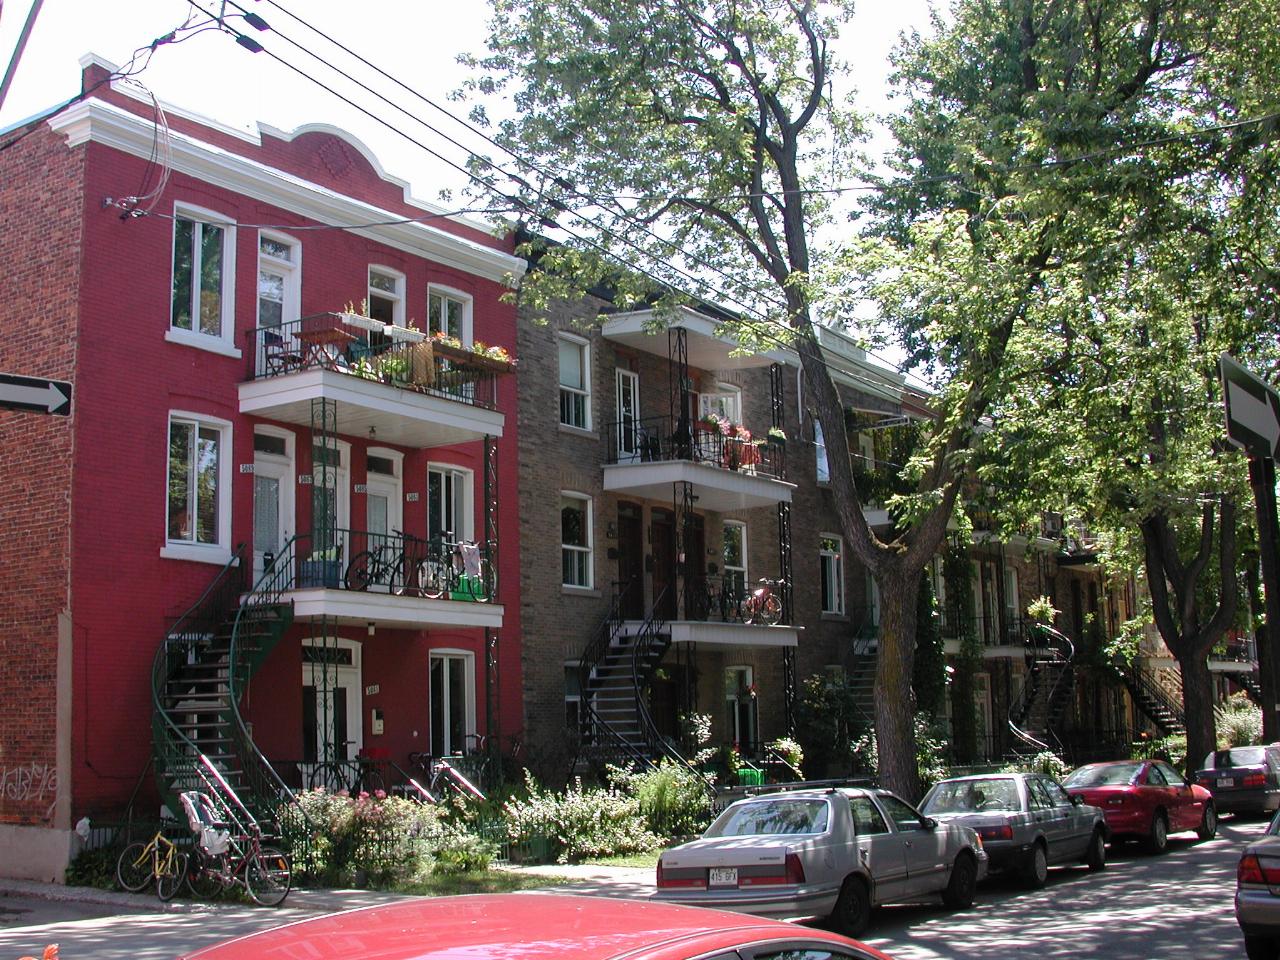 Another typical suburban Montreal street scene